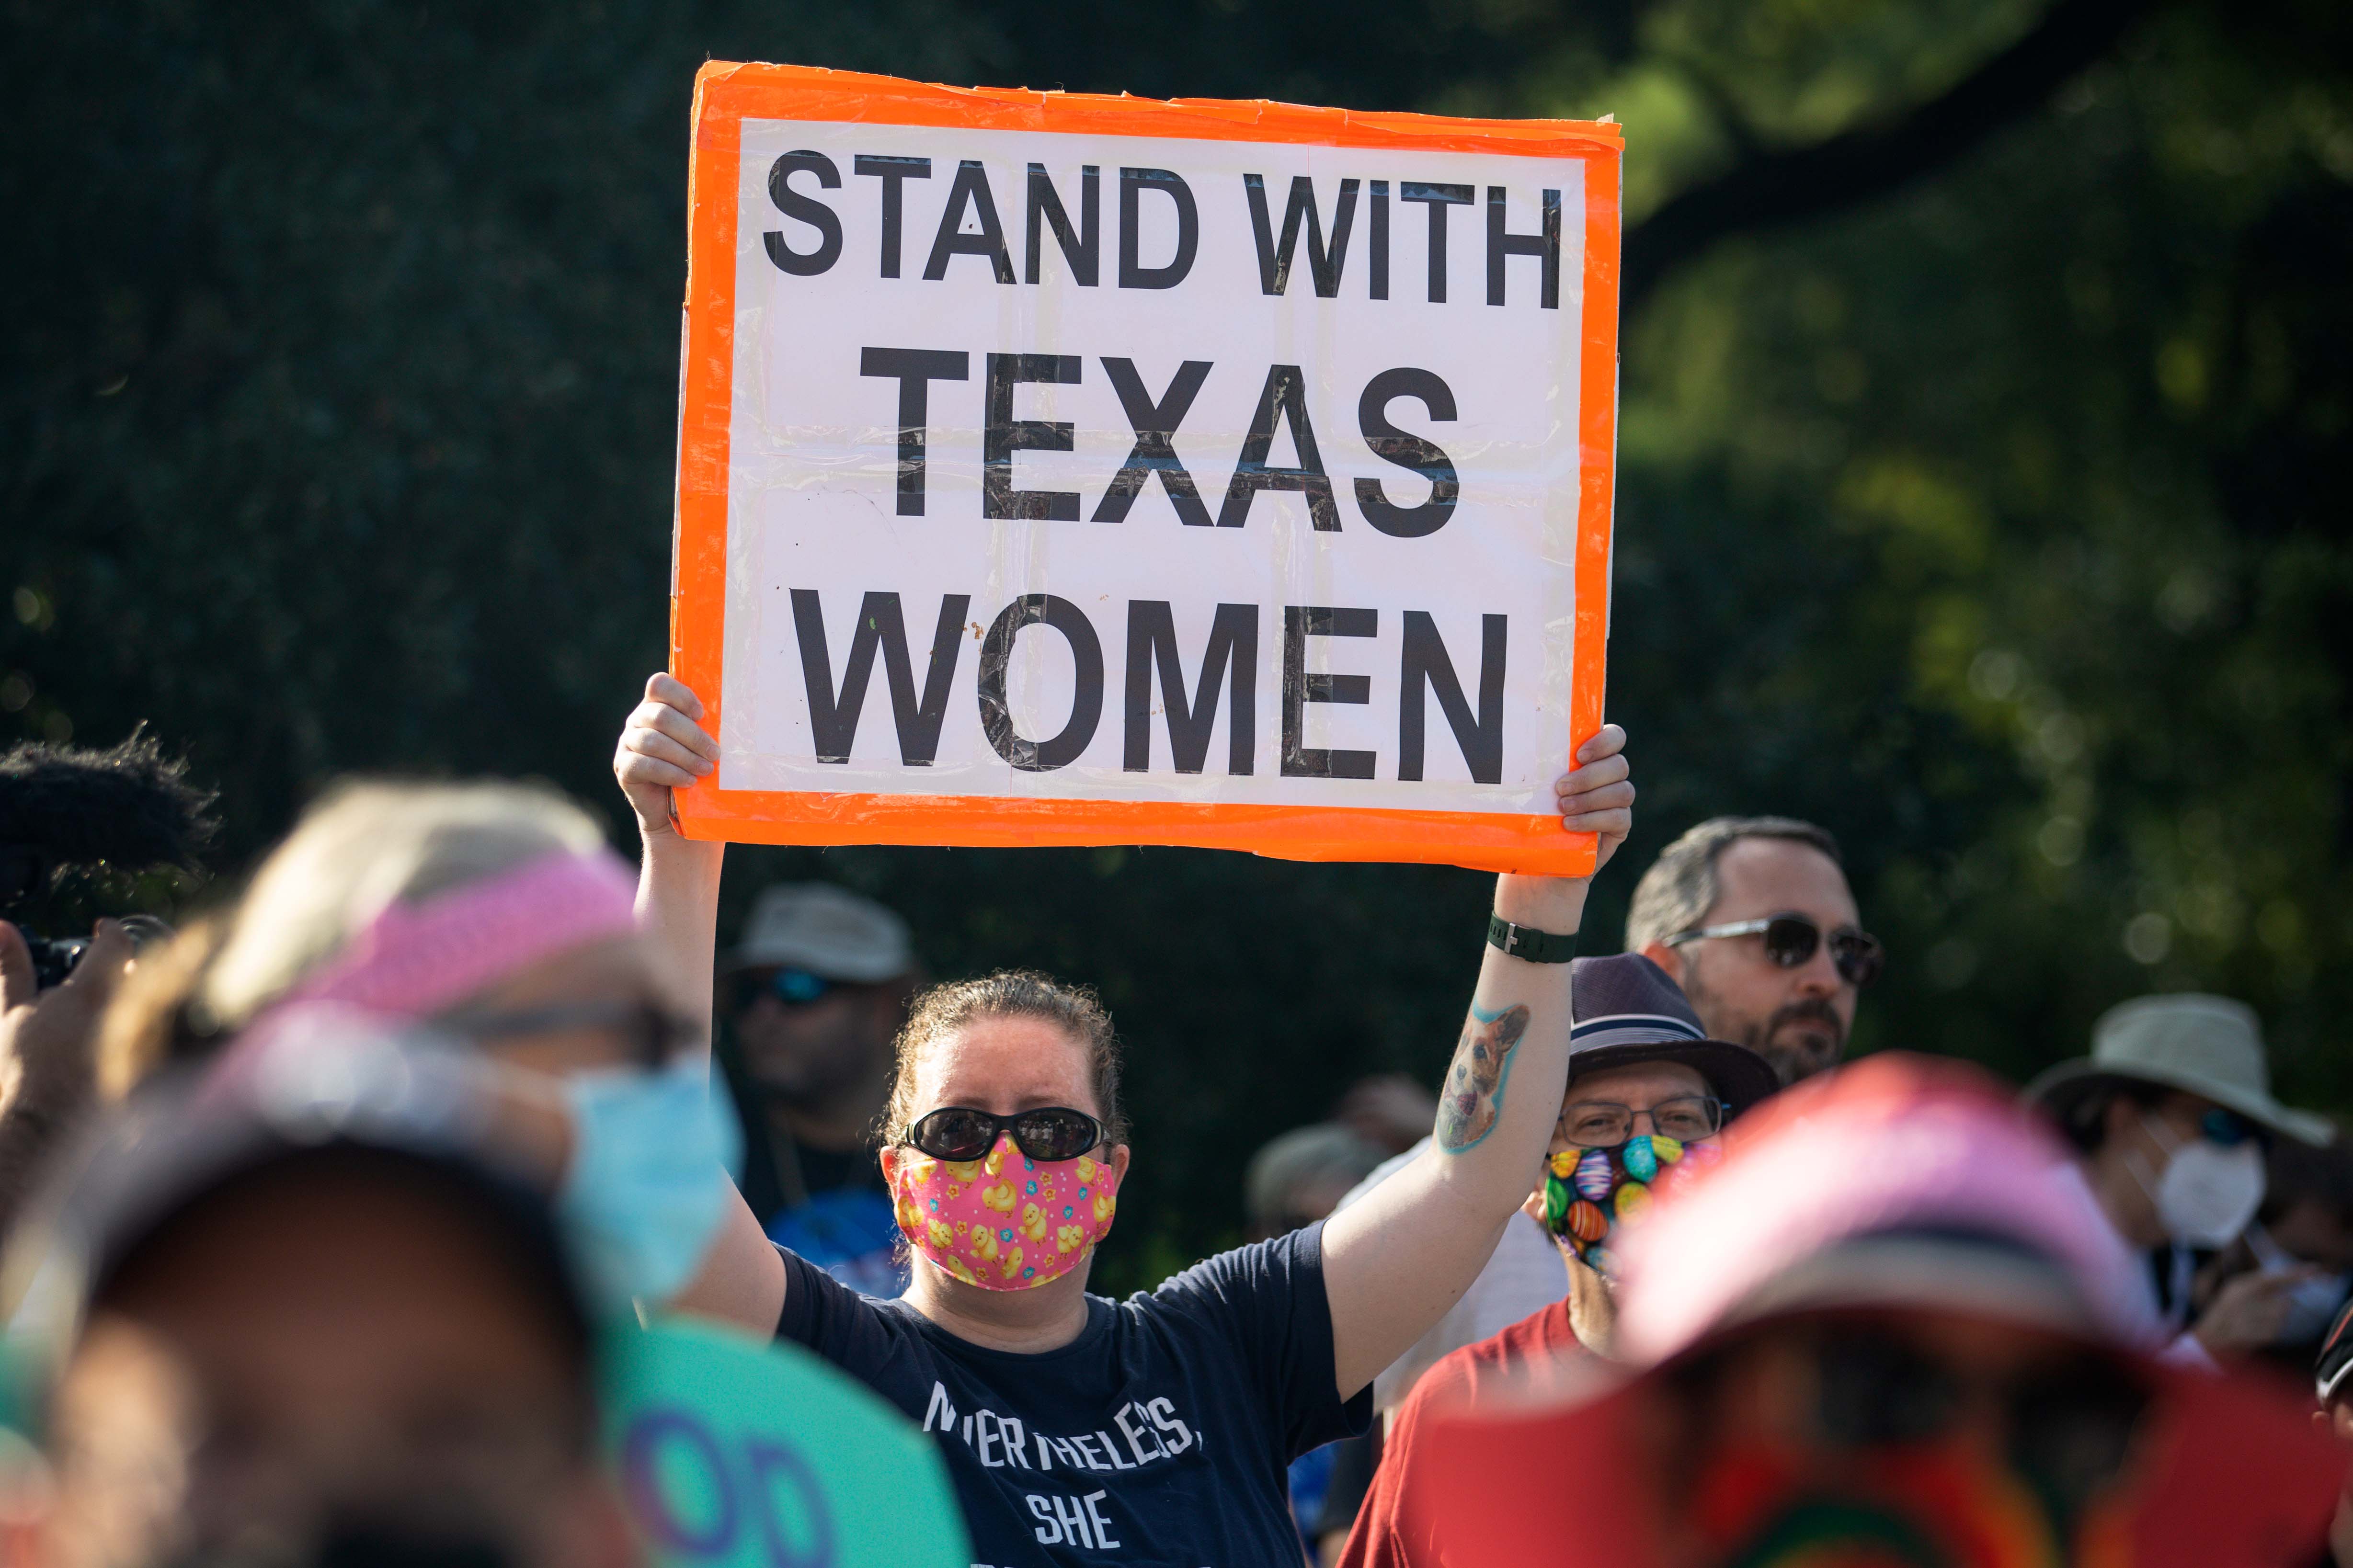 Demonstrators rally against anti-abortion and voter suppression laws at the Texas State Capitol on October 2, 2021 in Austin, Texas. The Women's March and other groups organized marches across the country to protest the new abortion law in Texas. (Photo by Montinique Monroe/Getty Images)